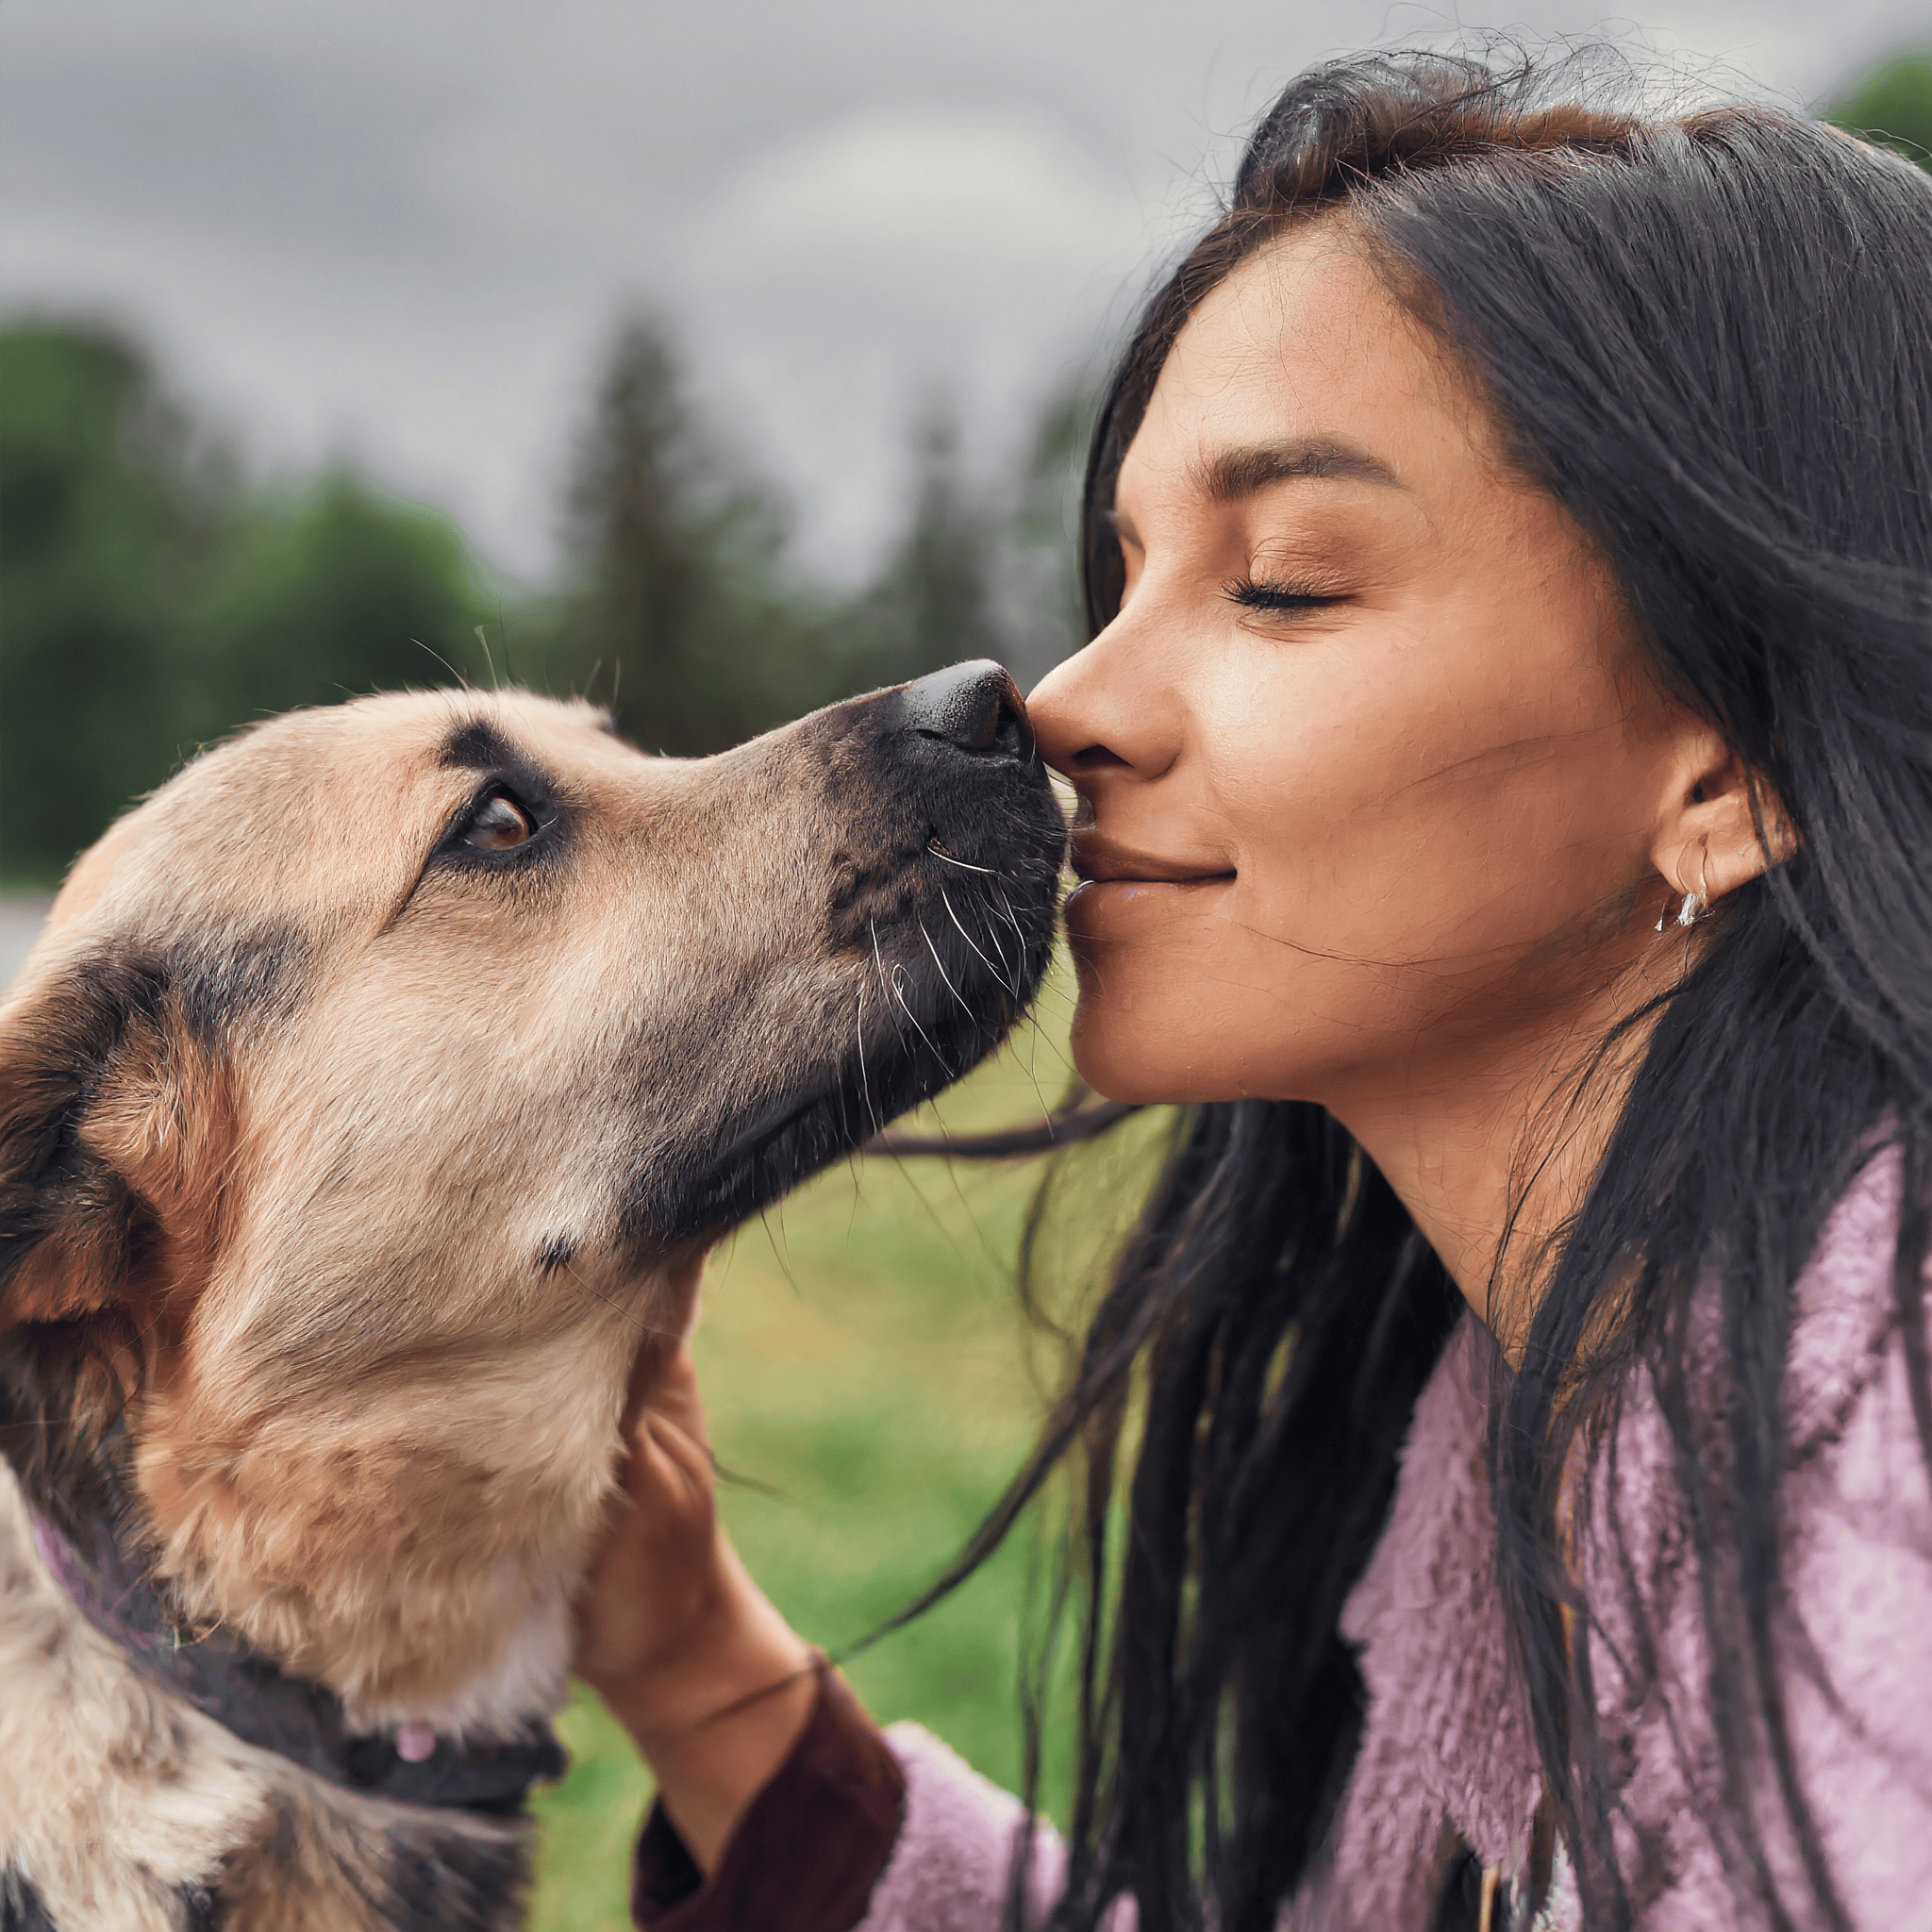 Your dog jumps to get close to your face. But a jumping dog can be dangerous. Instead, squat down so your dog keeps four paws on the floor. Then reward good behavior with attention and praise.